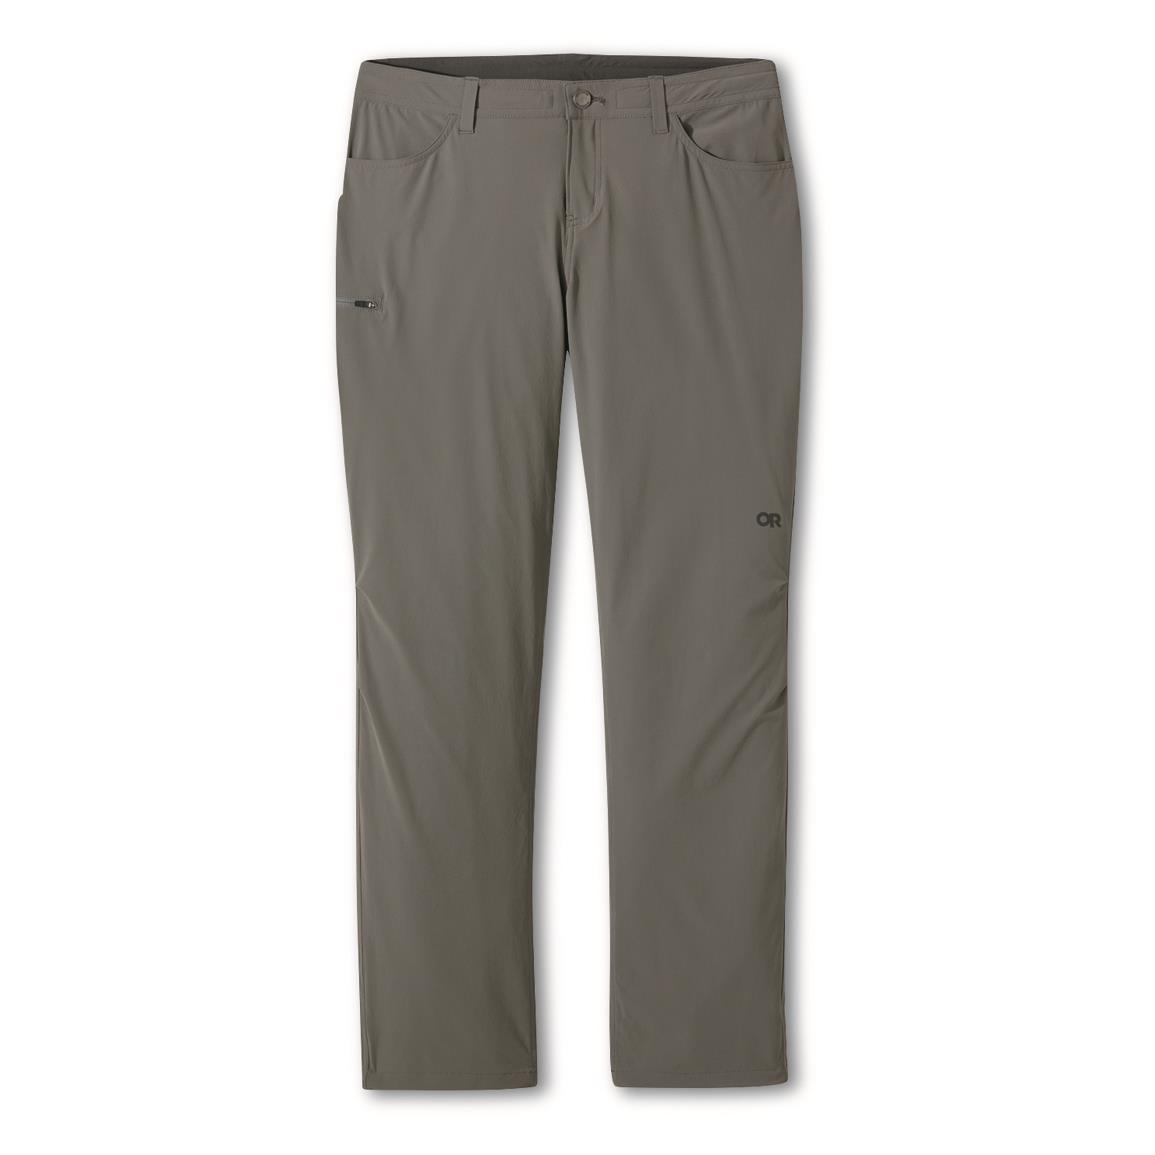 Outdoor Research Women's Ferrosi Pants, Pewter